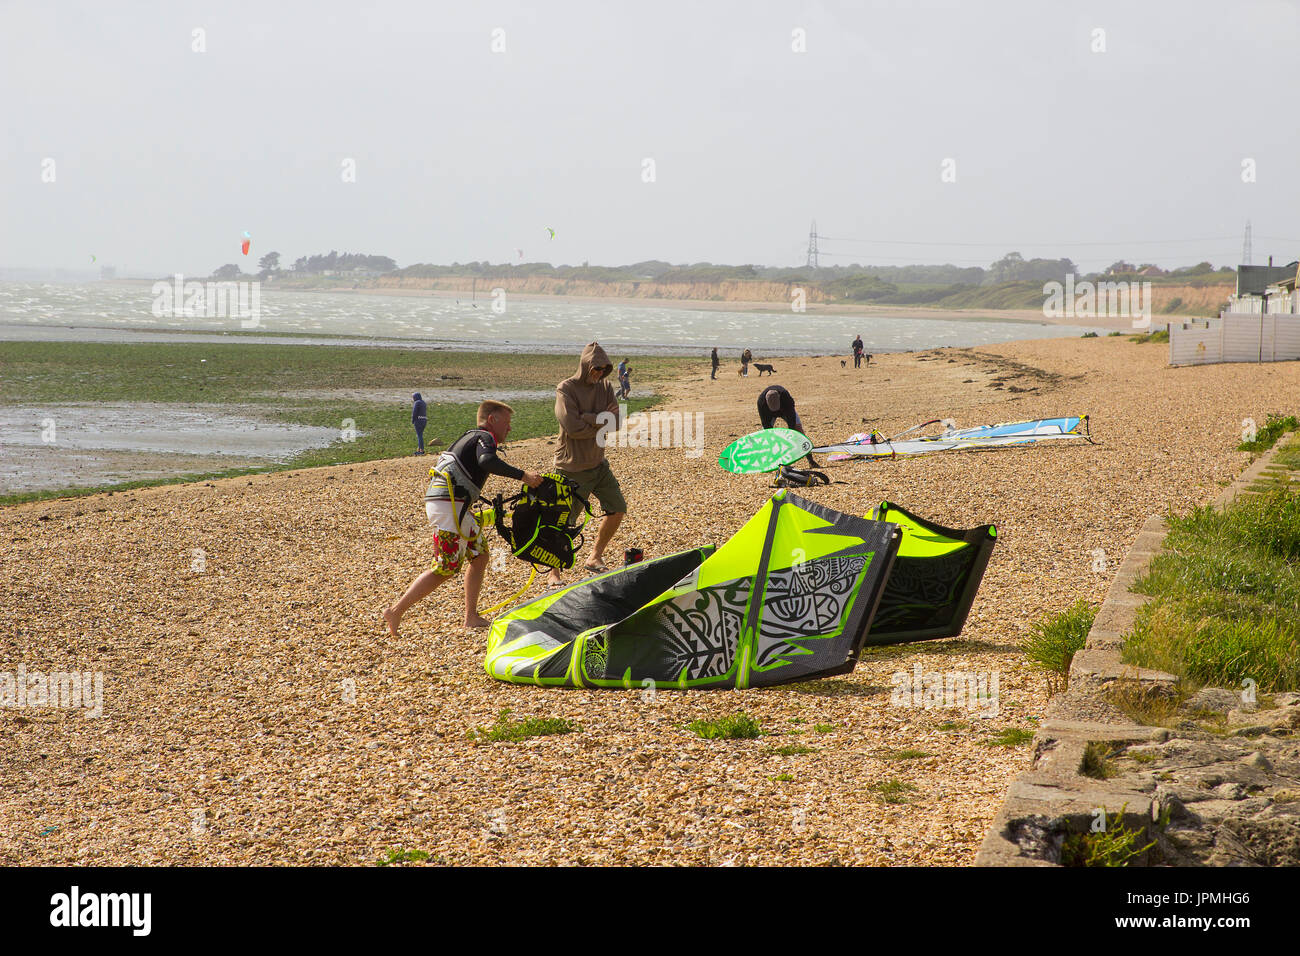 A couple of young men struggle against a stiff breeze to prepare their para glider for an afternoons sport at the beach in Titchfield, Hampshire in th Stock Photo